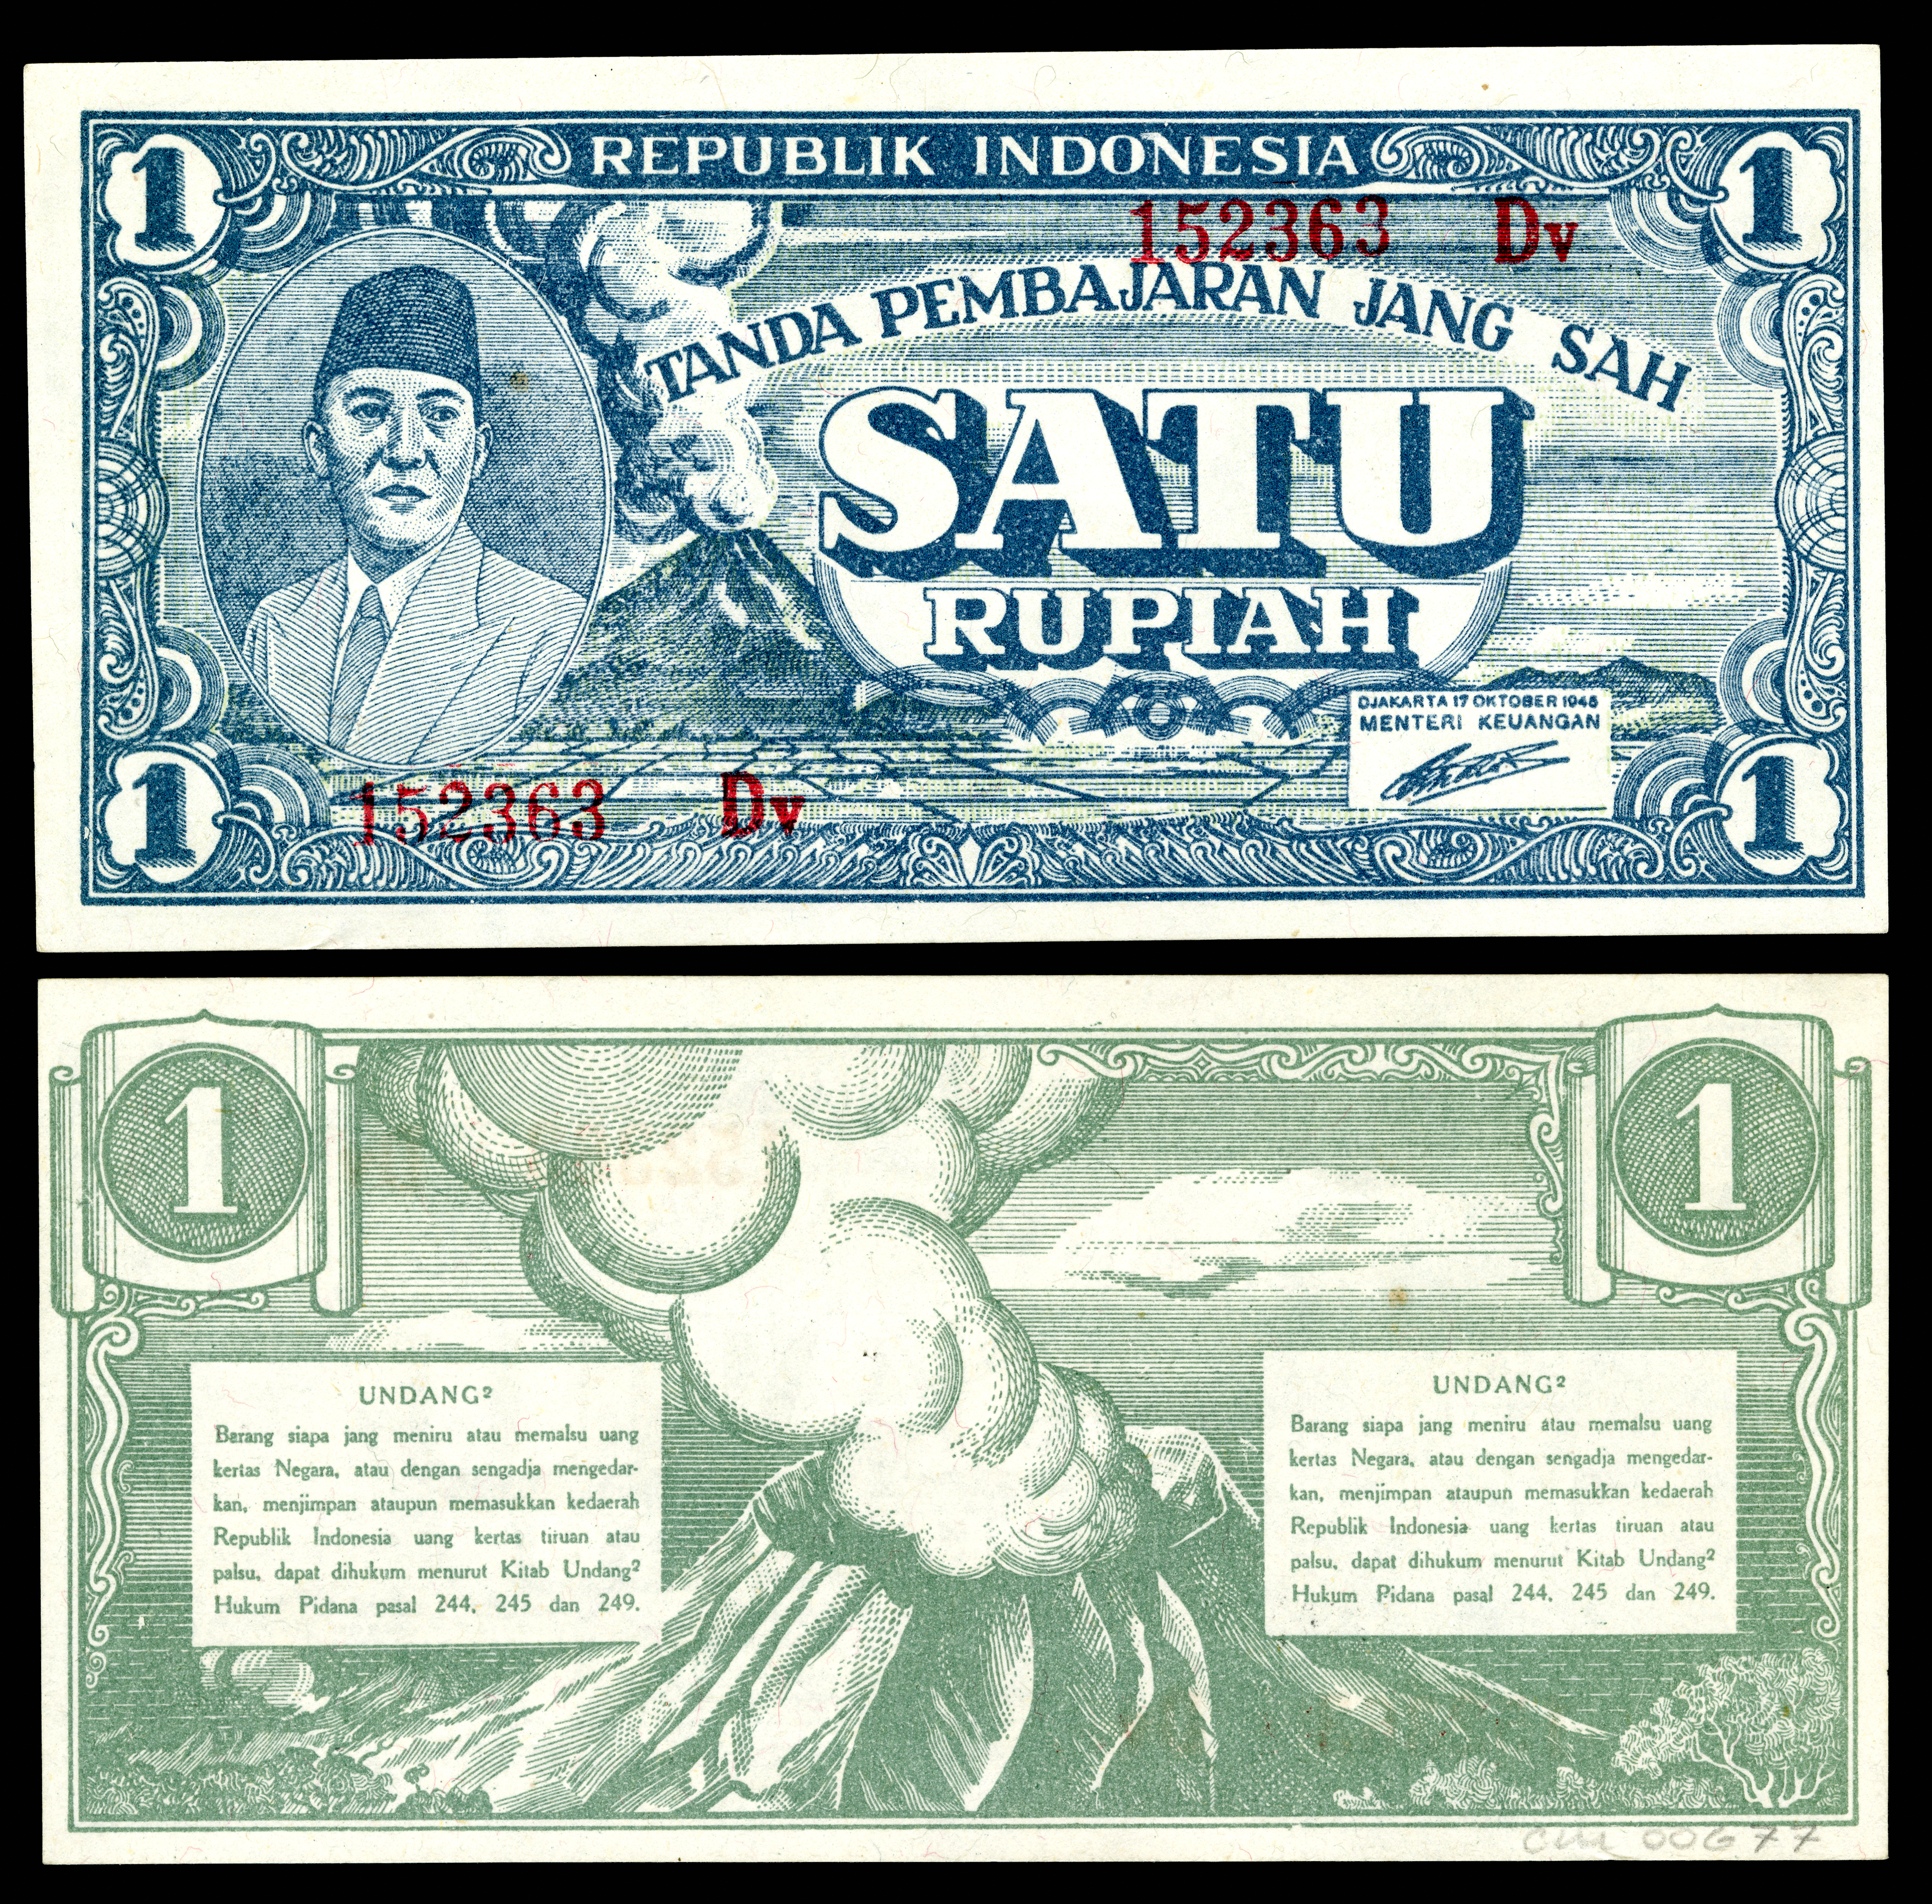 Banknotes of the rupiah - Wikipedia